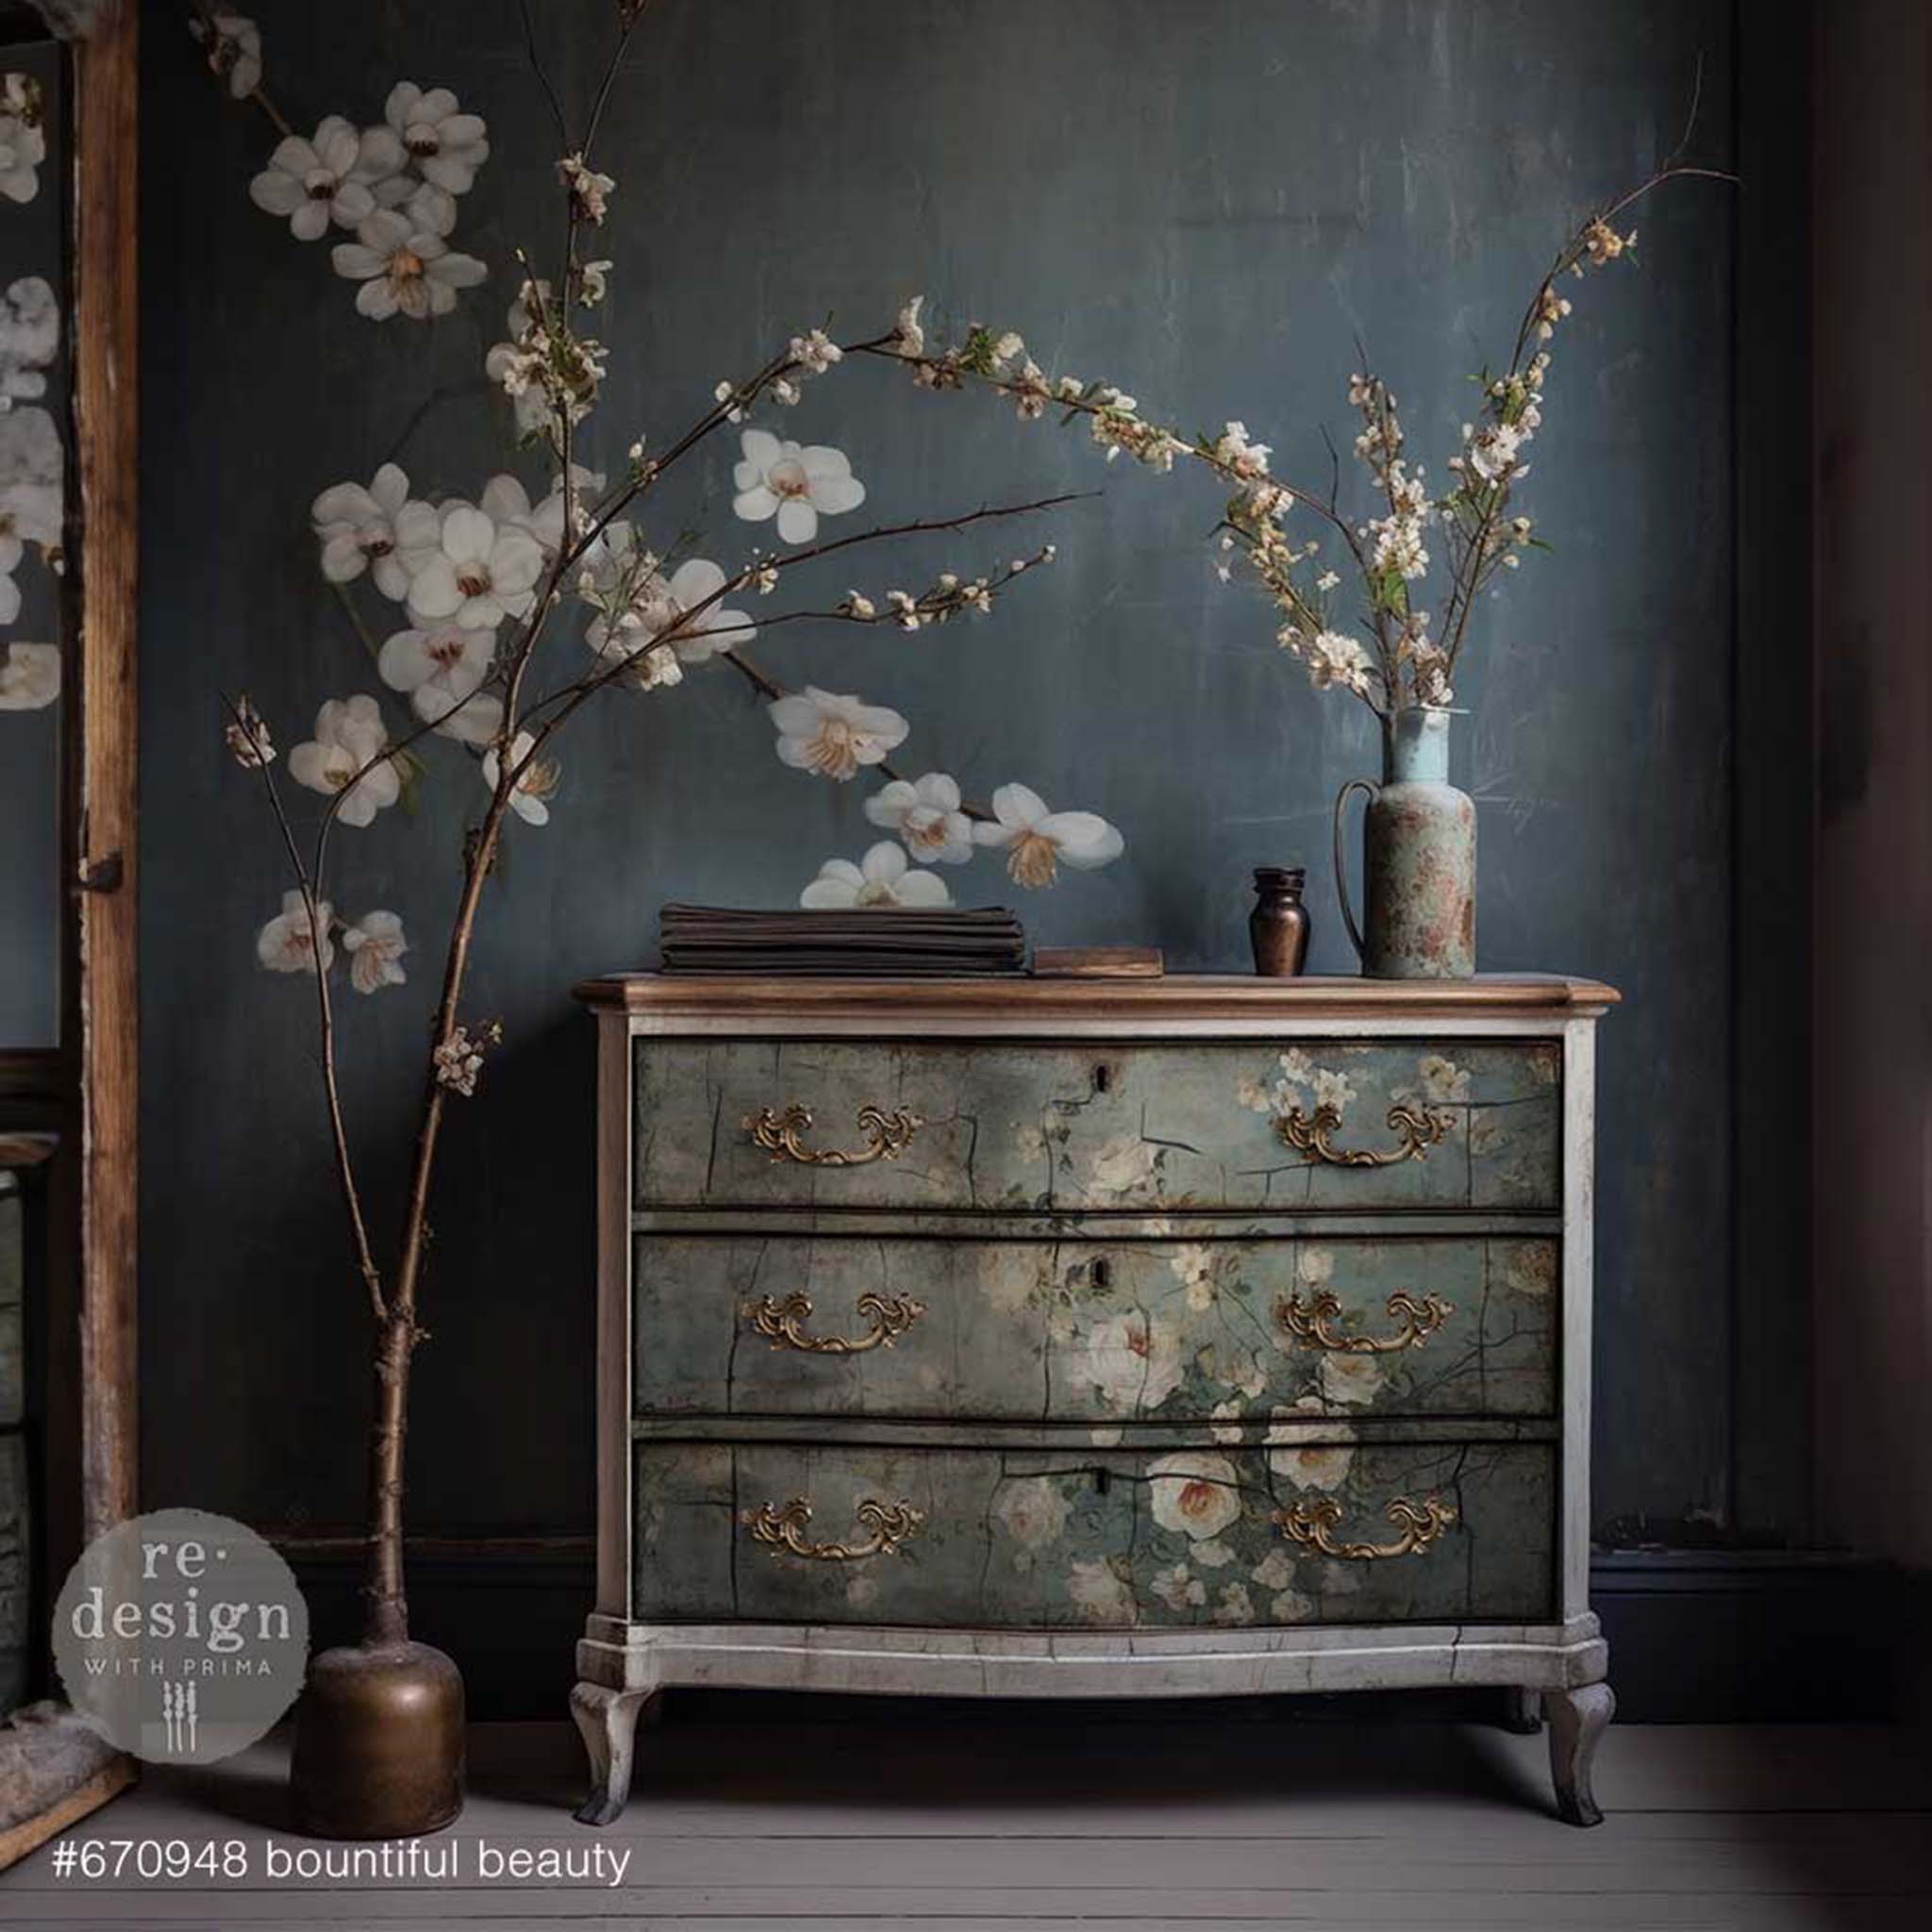 A vintage 3-drawer dresser is painted light gray and features ReDesign with Prima's Bountiful Beauty tissue paper of white roses on a faded blue background on its drawers.